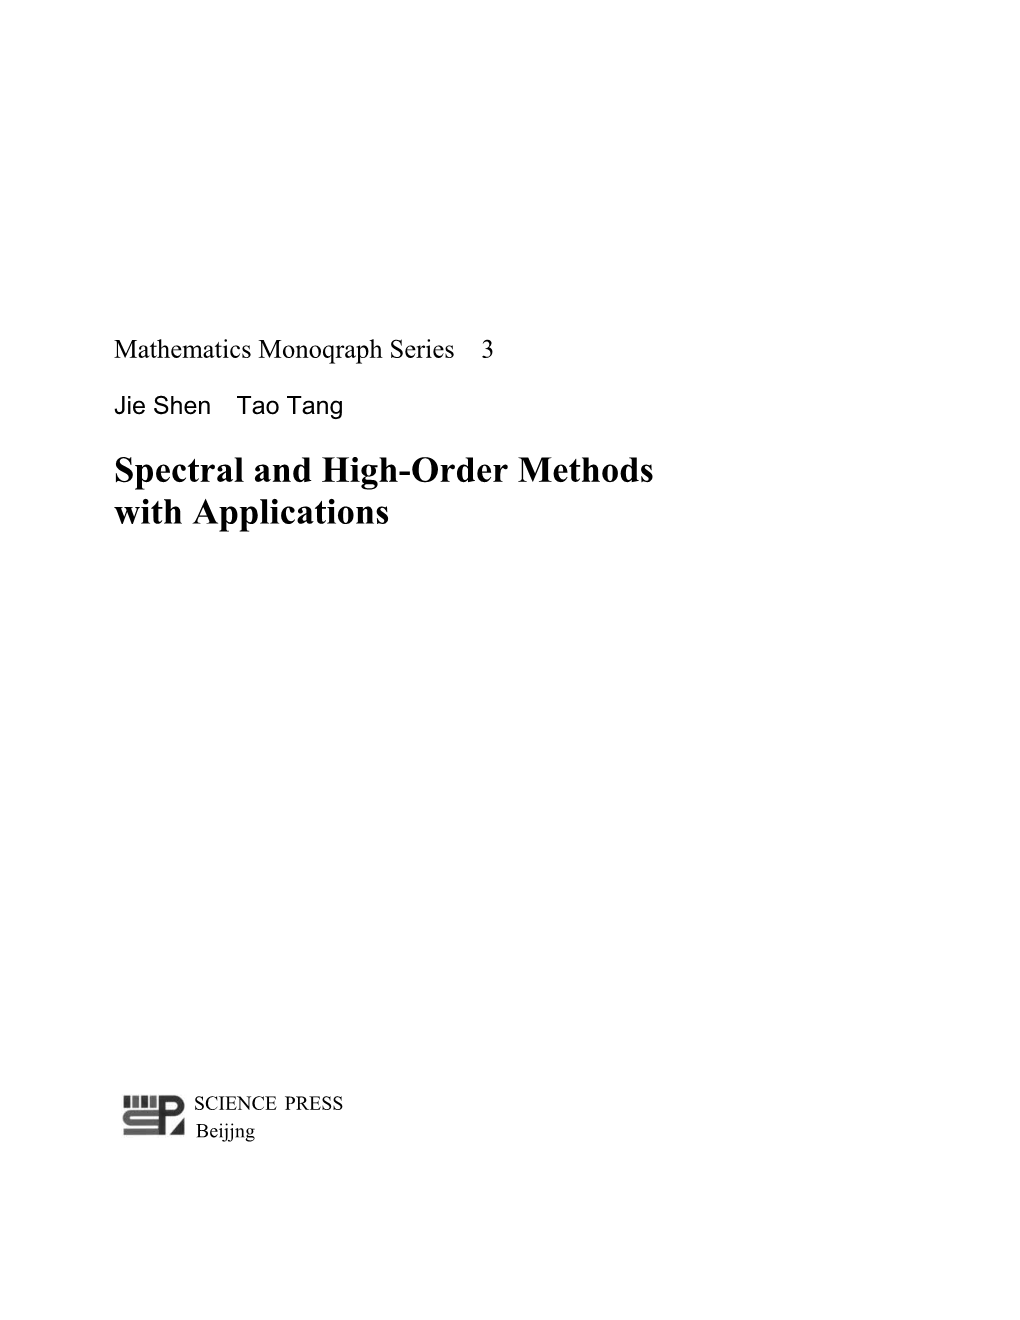 Spectral and High-Order Methods with Applications